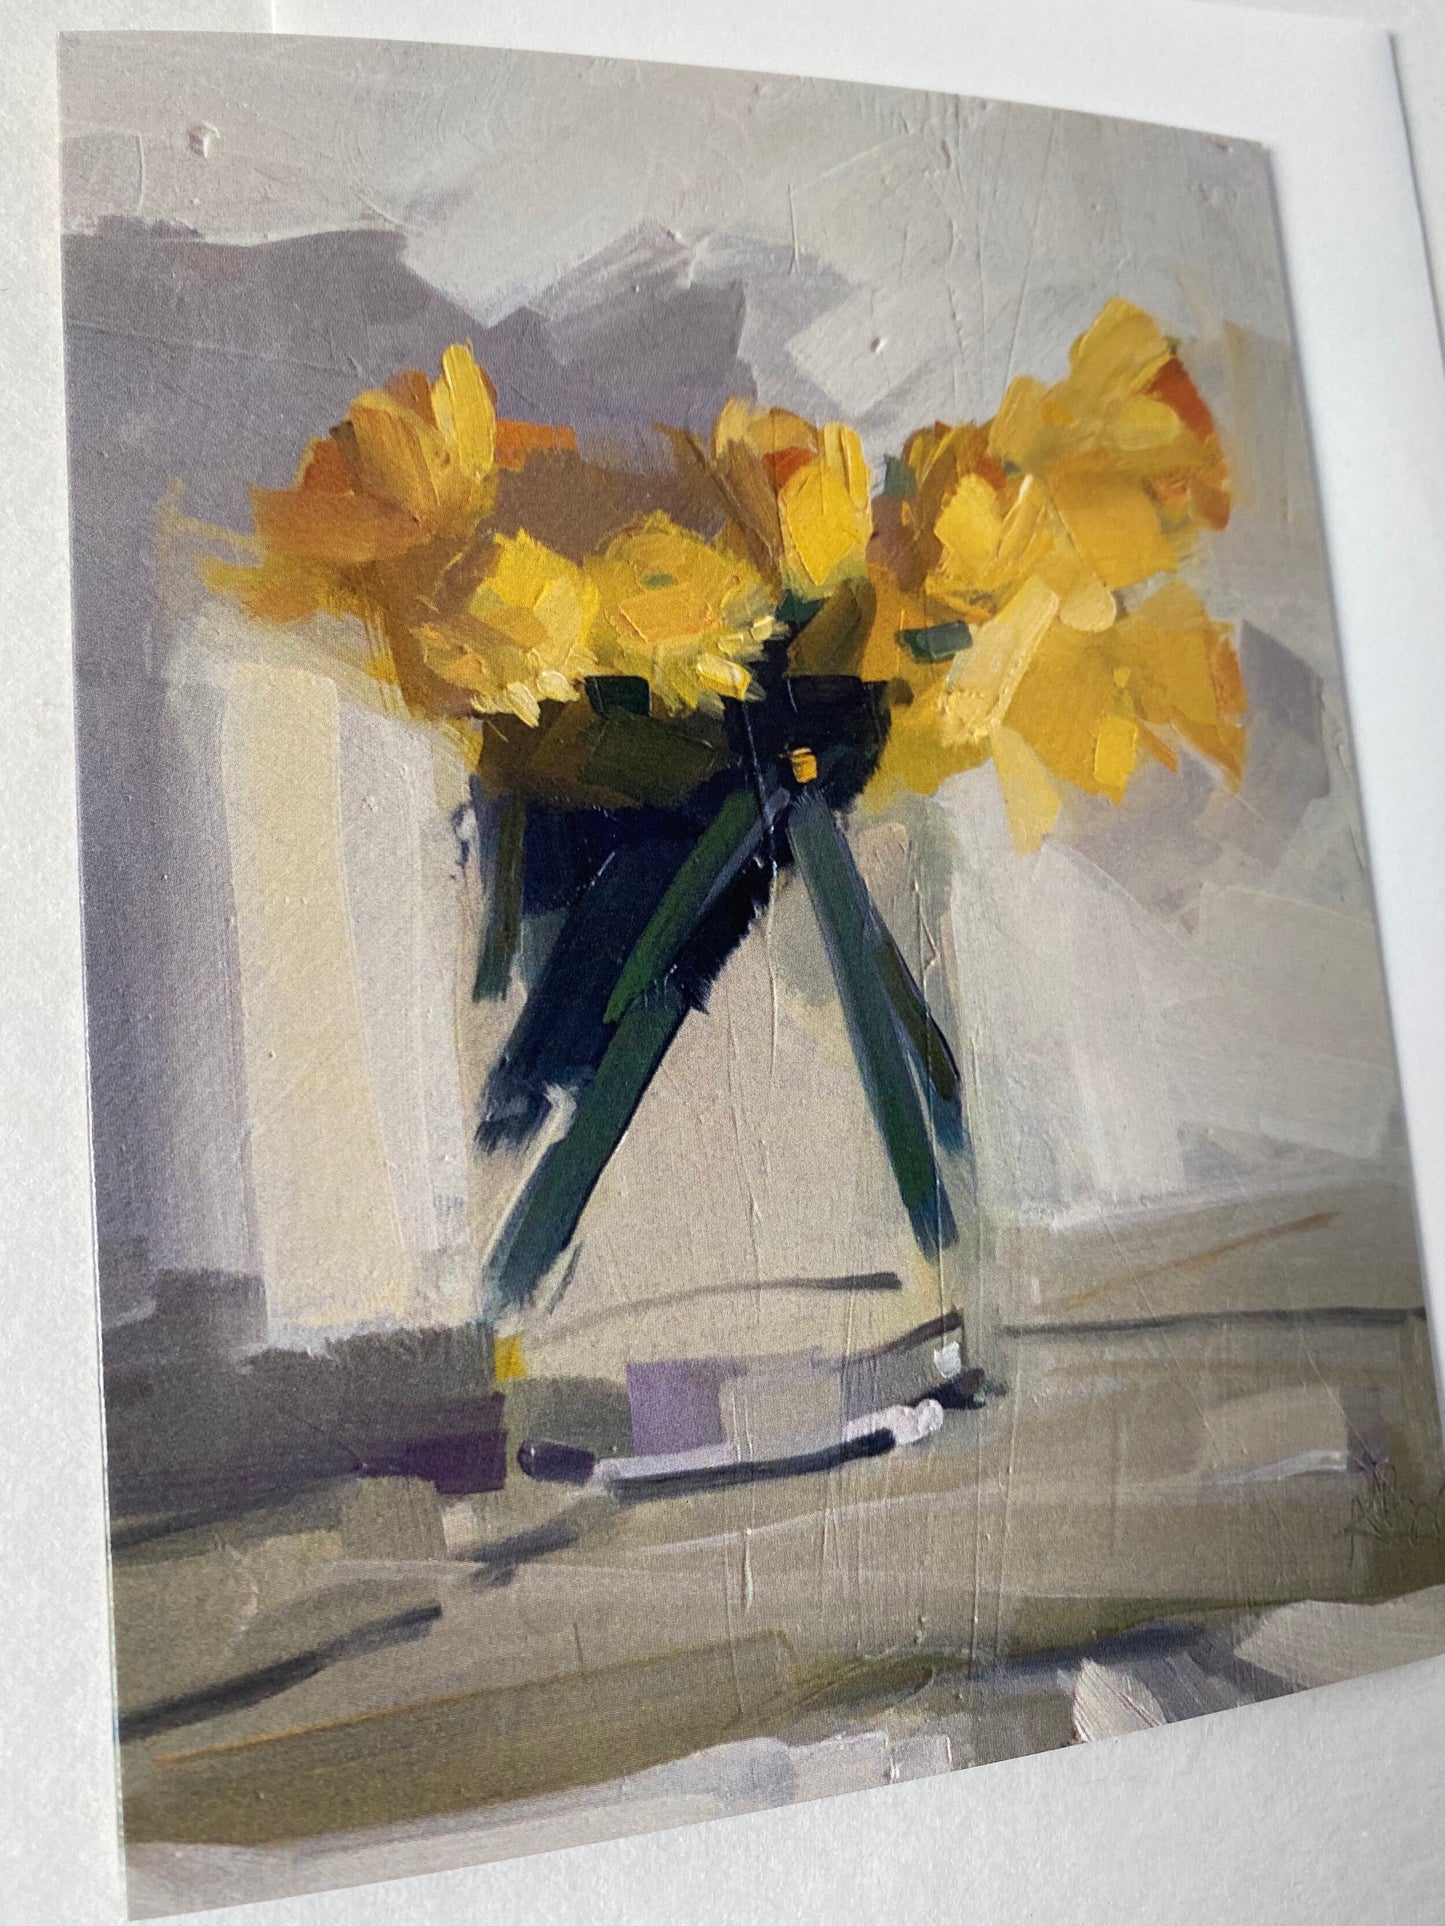 Daffodils Notecards, Set and Singles